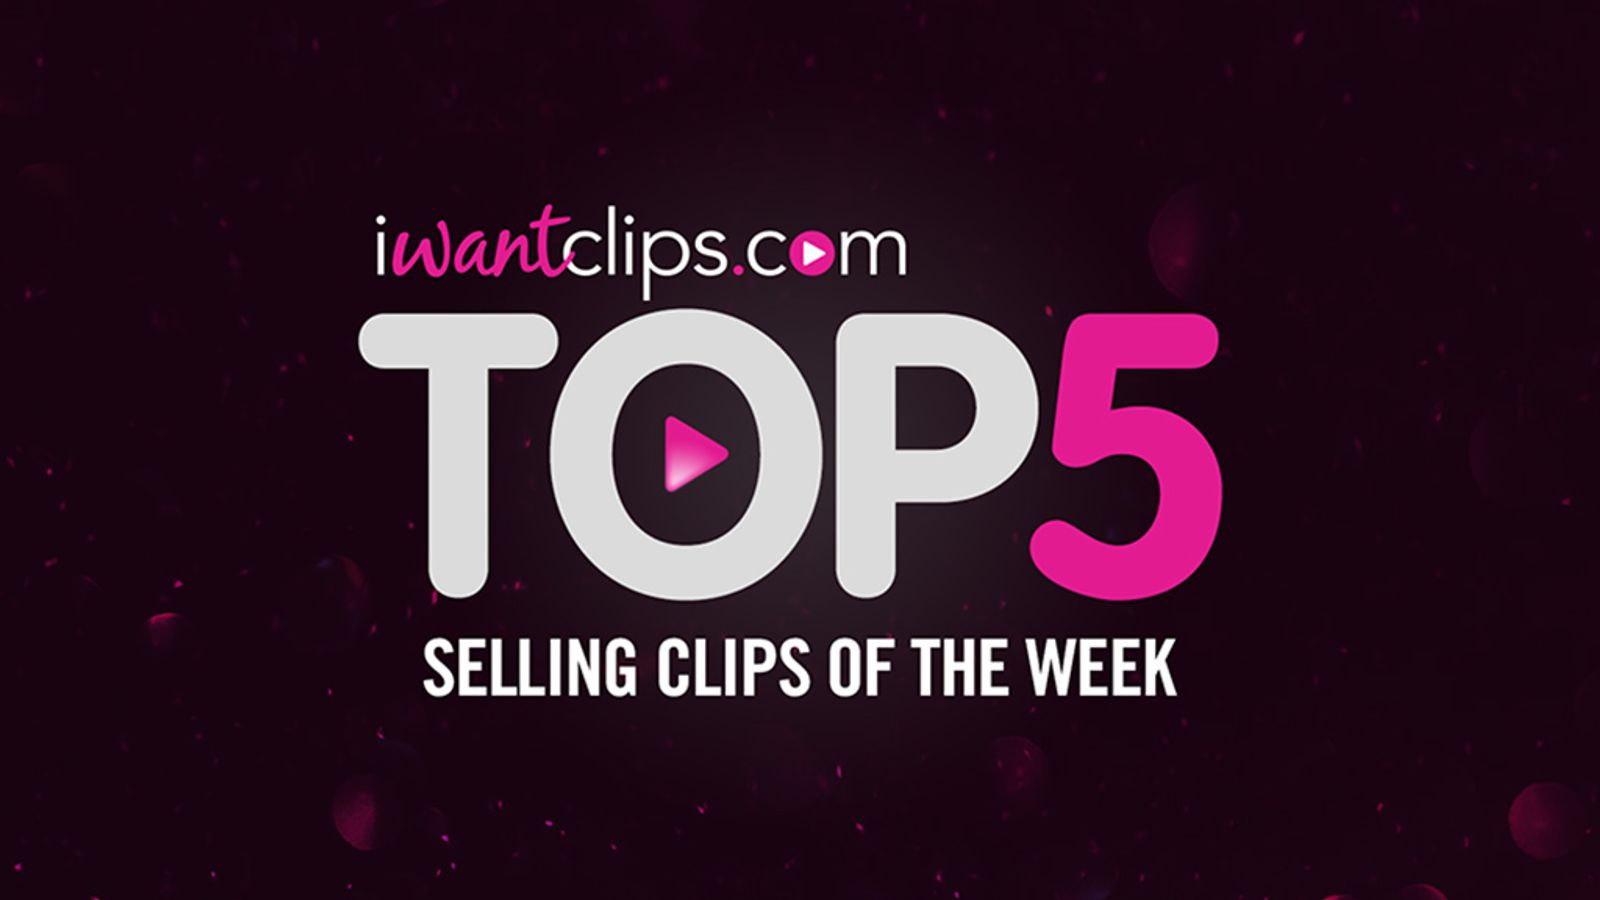 It's Dom, Dom, Dom Topping iWantClips' Charts This Week